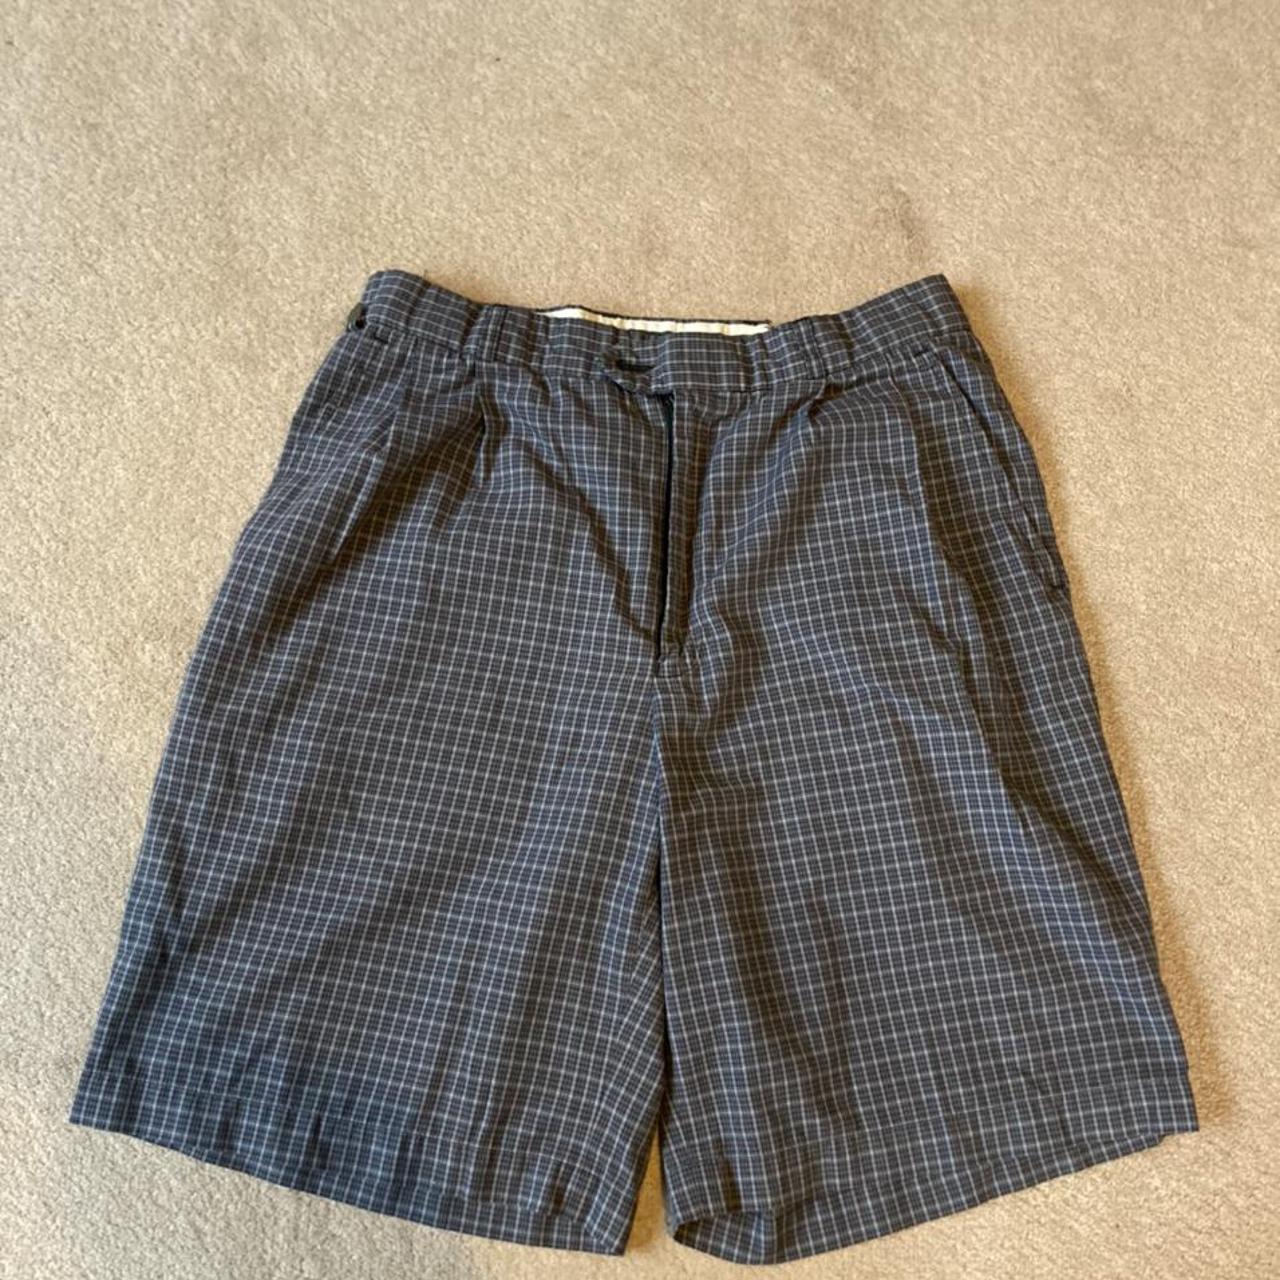 Lacoste Men's Navy and Grey Shorts | Depop